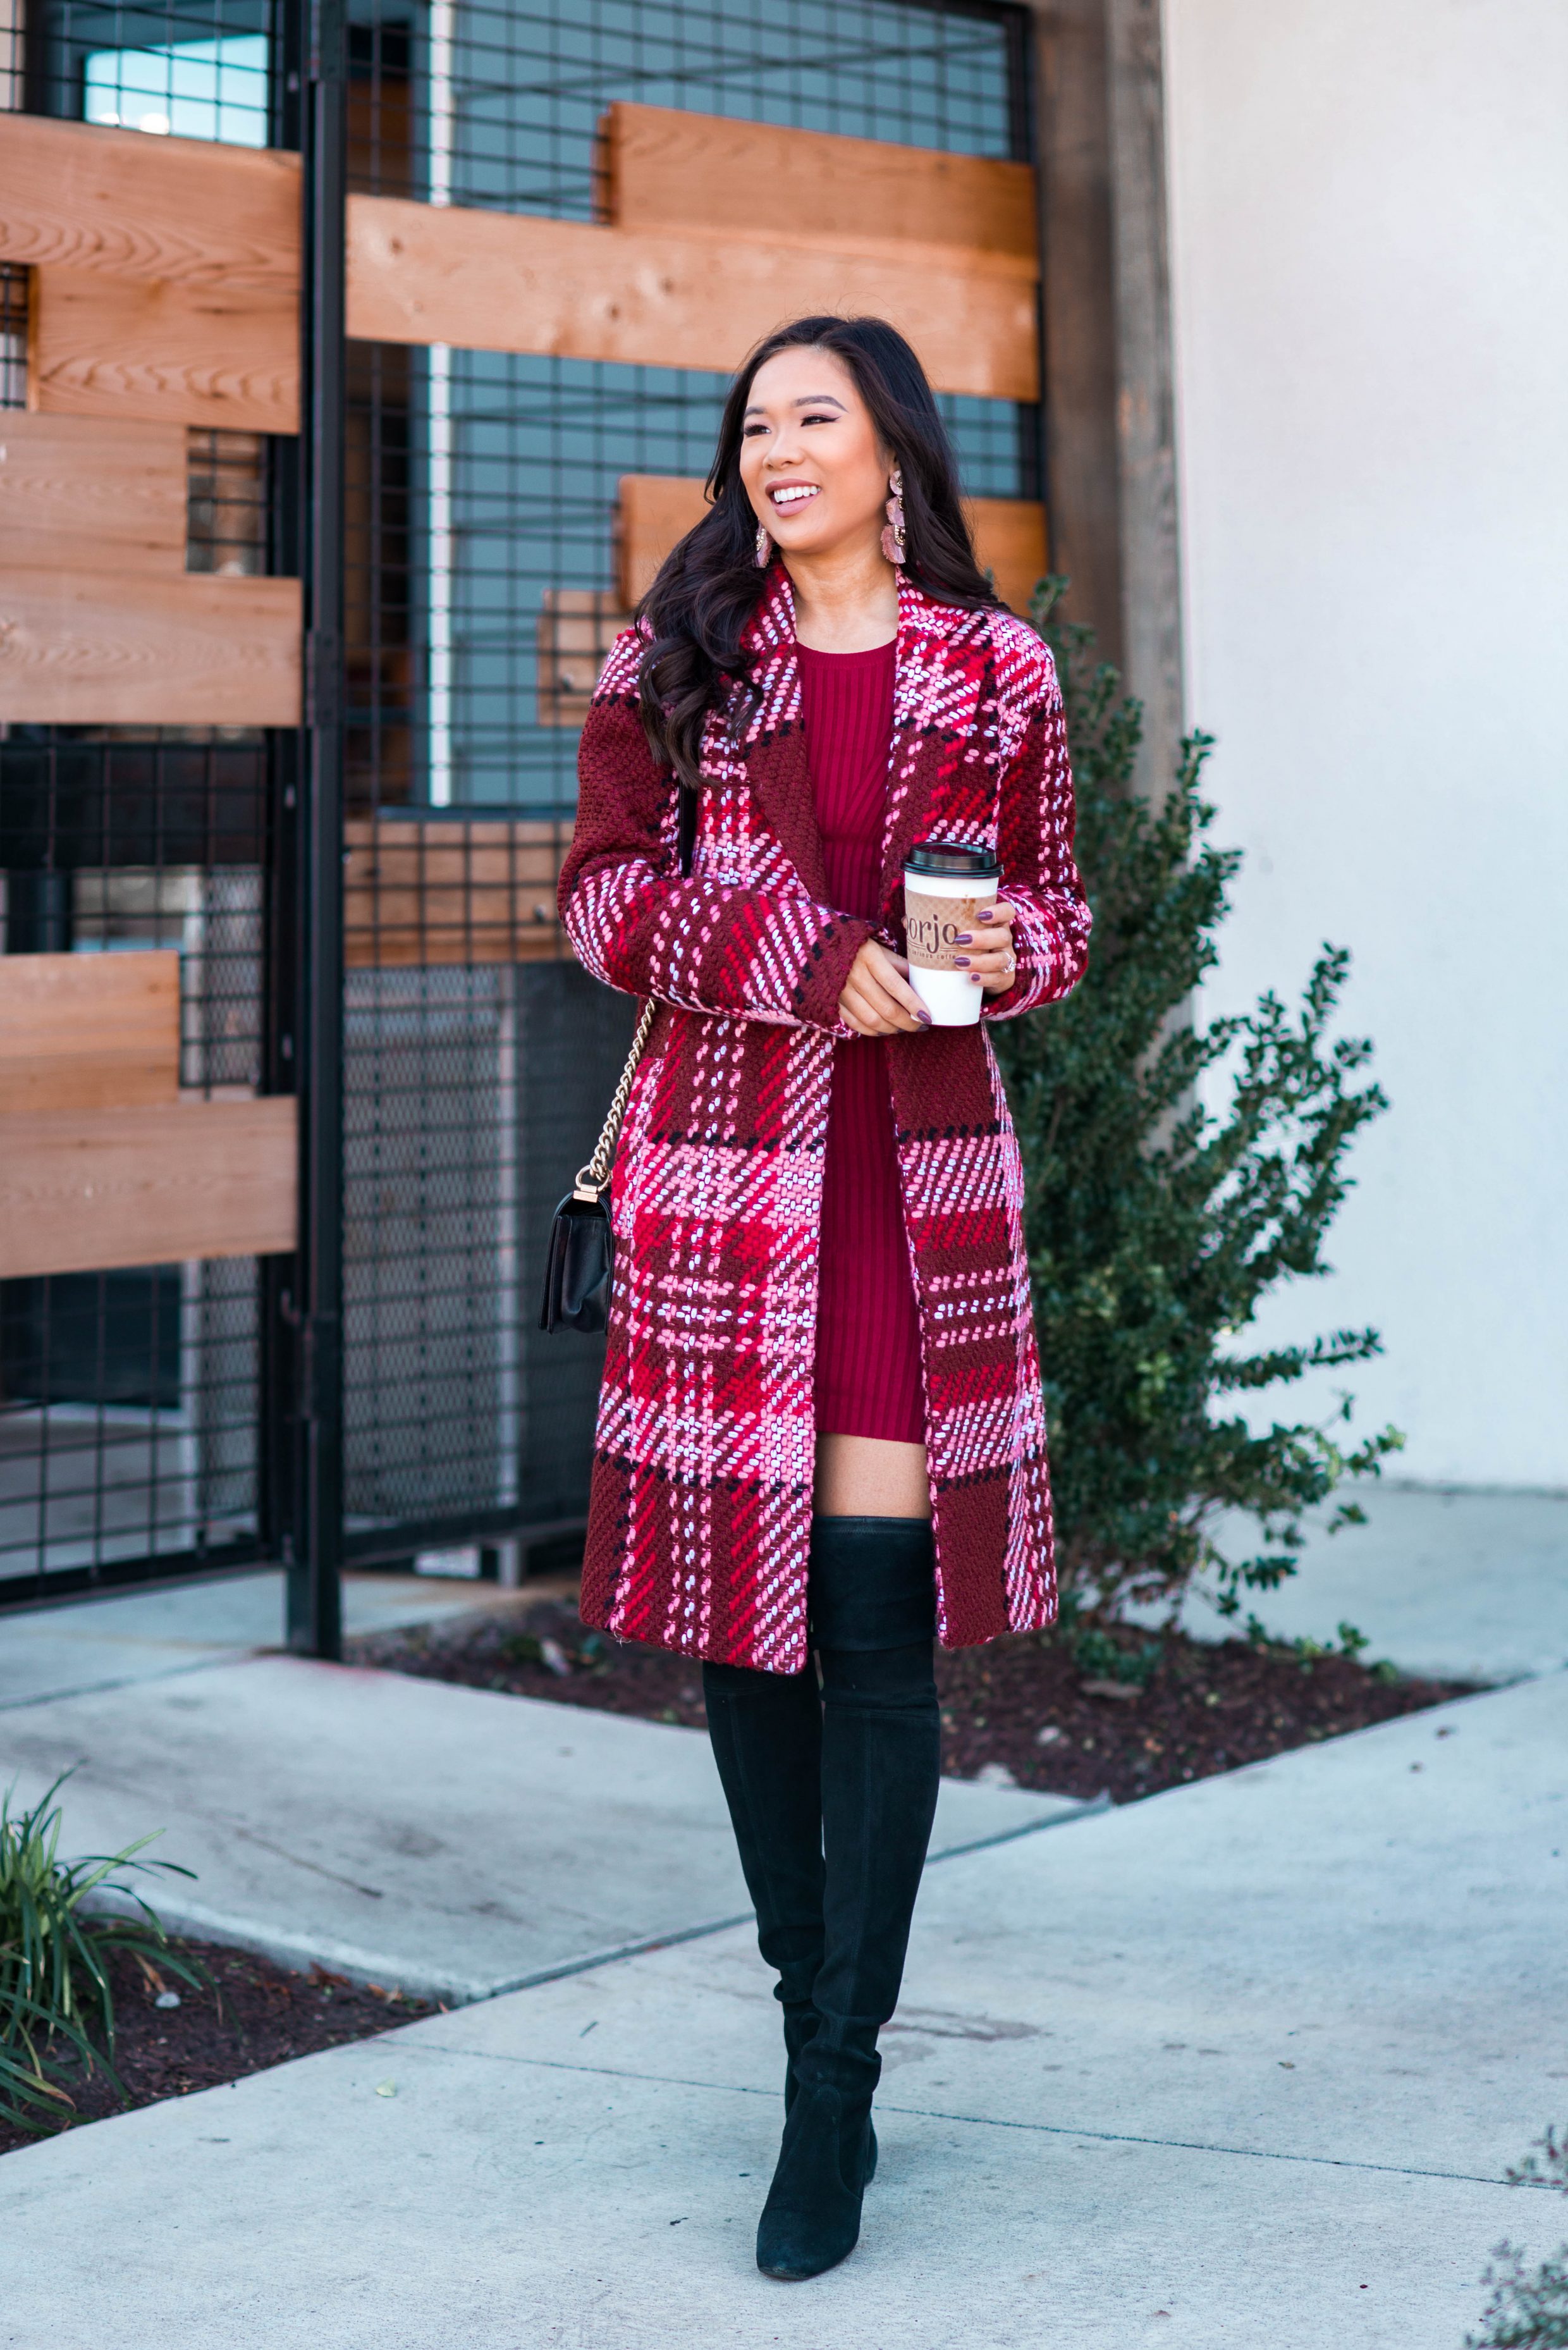 Blogger Hoang-Kim styles a plaid statement coat for fall and winter